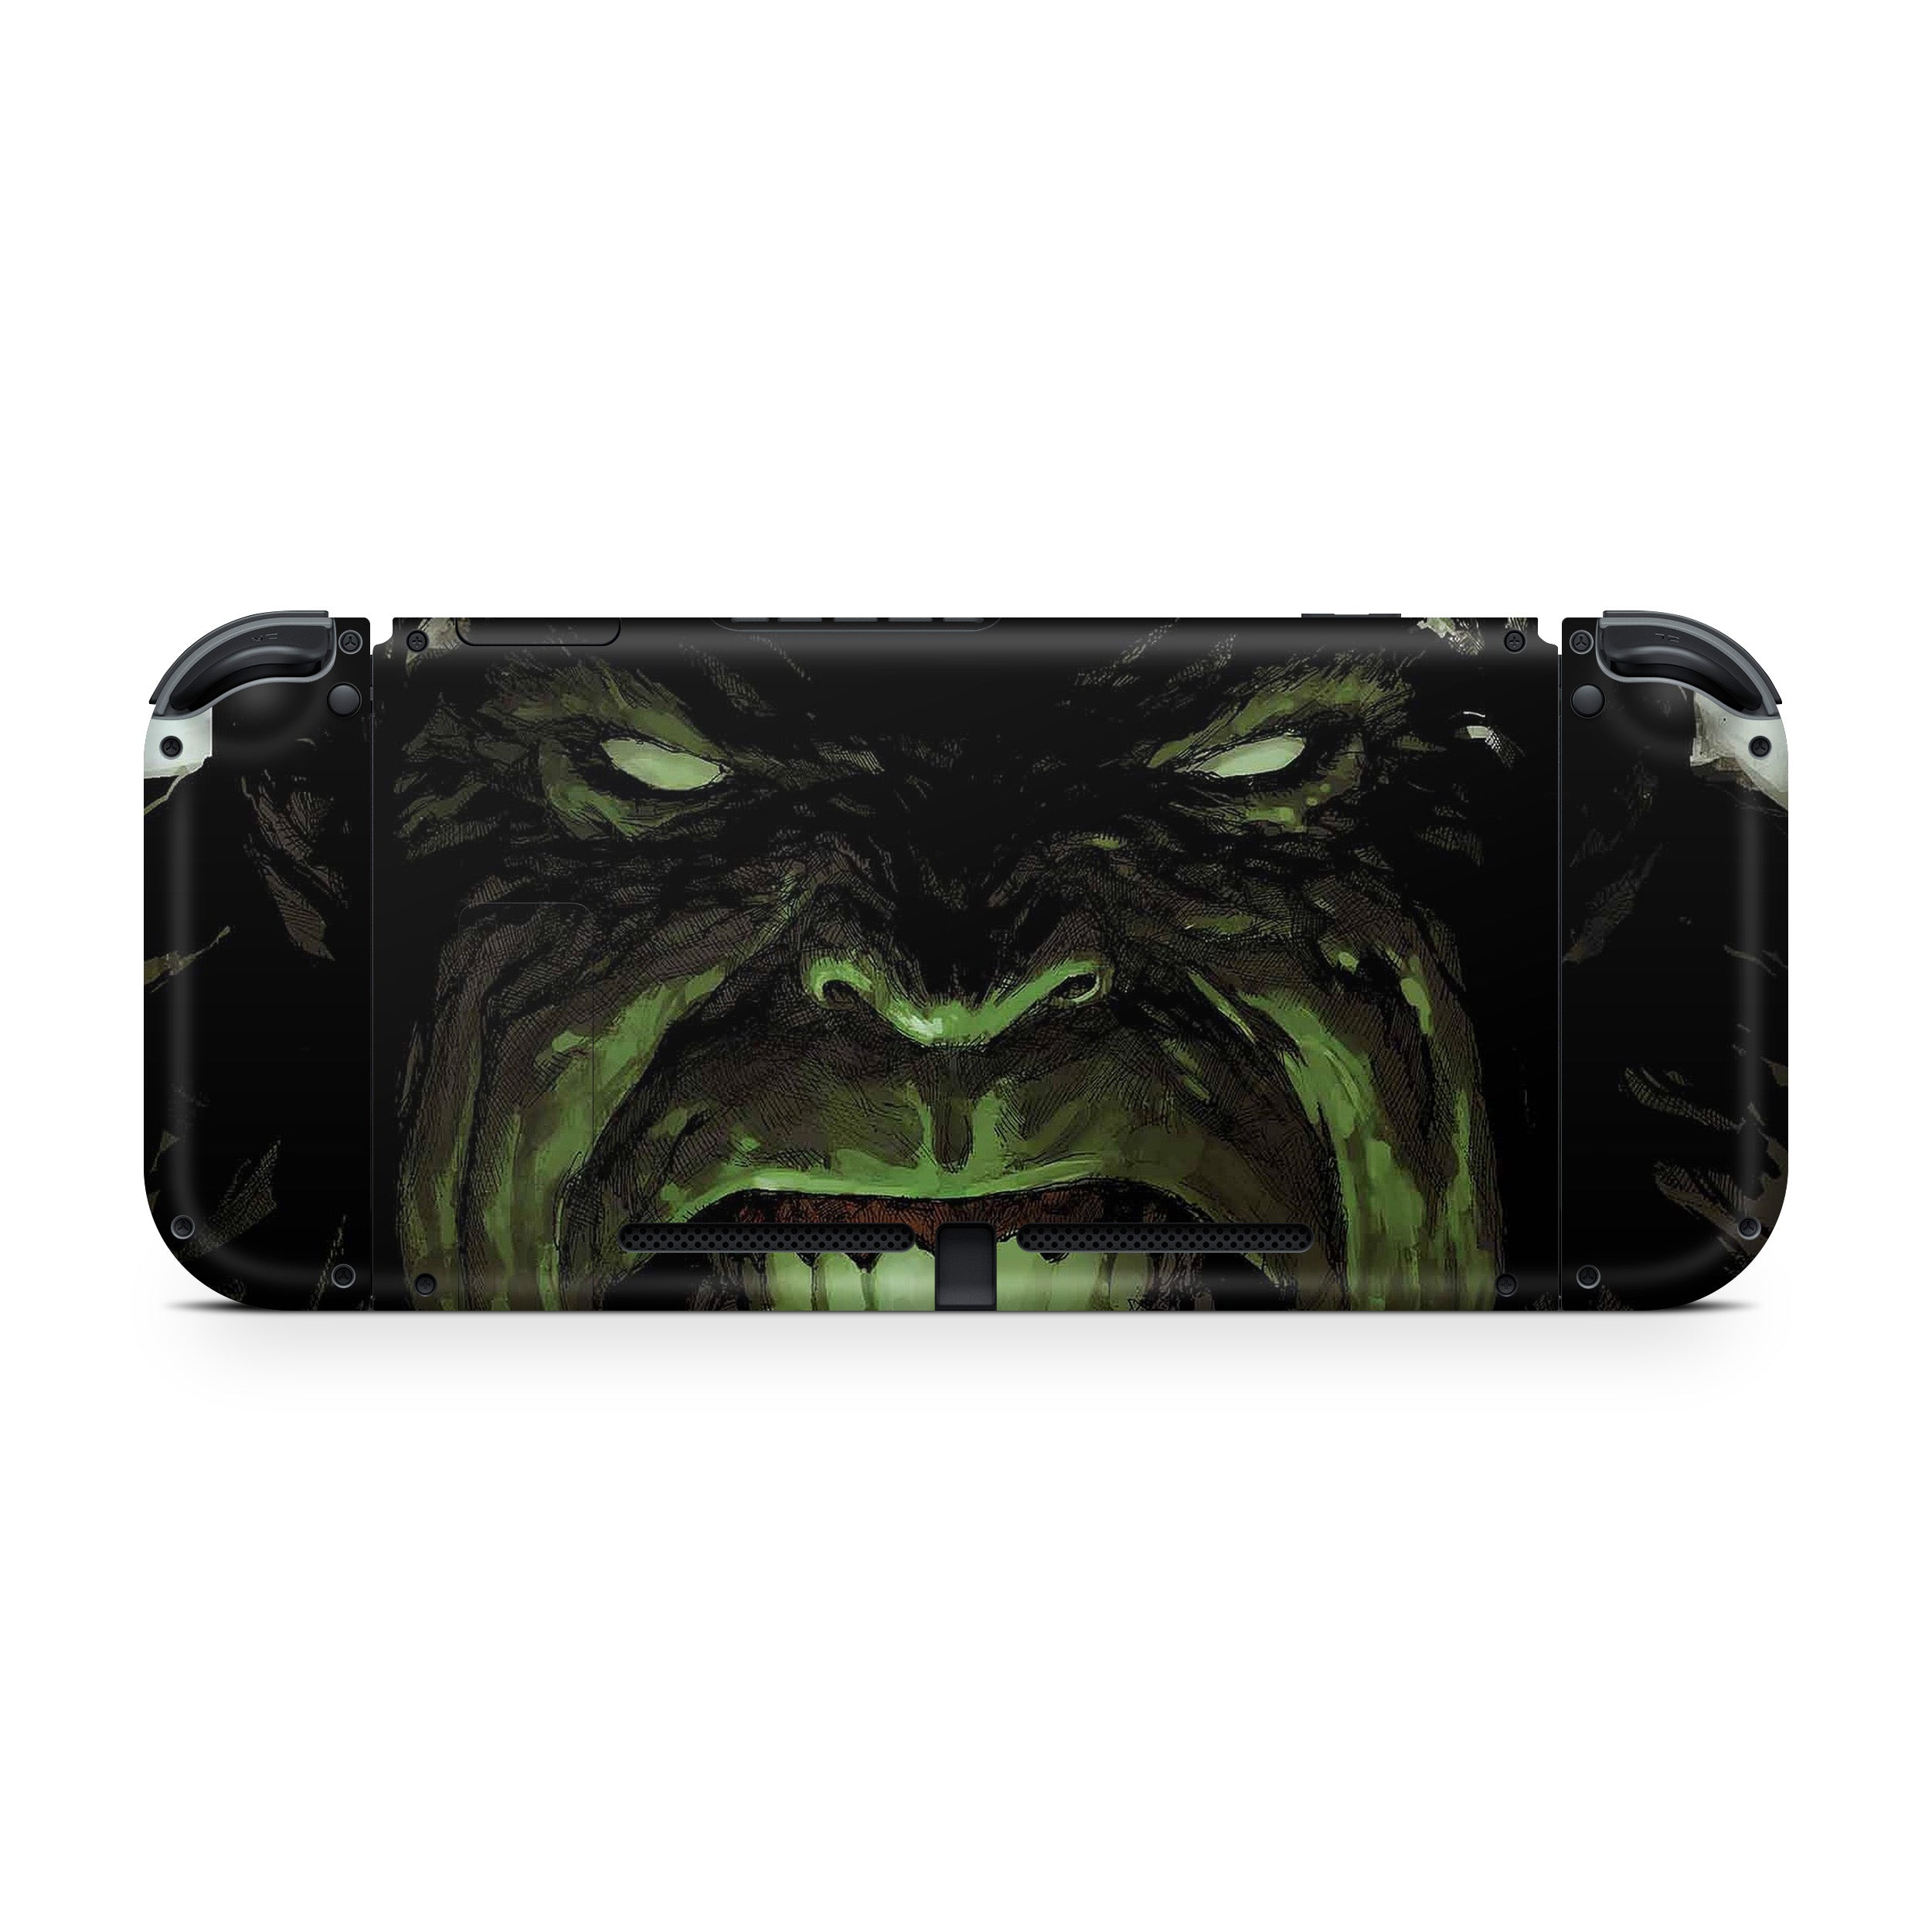 A video game skin featuring a Marvel Hulk design for the Nintendo Switch.